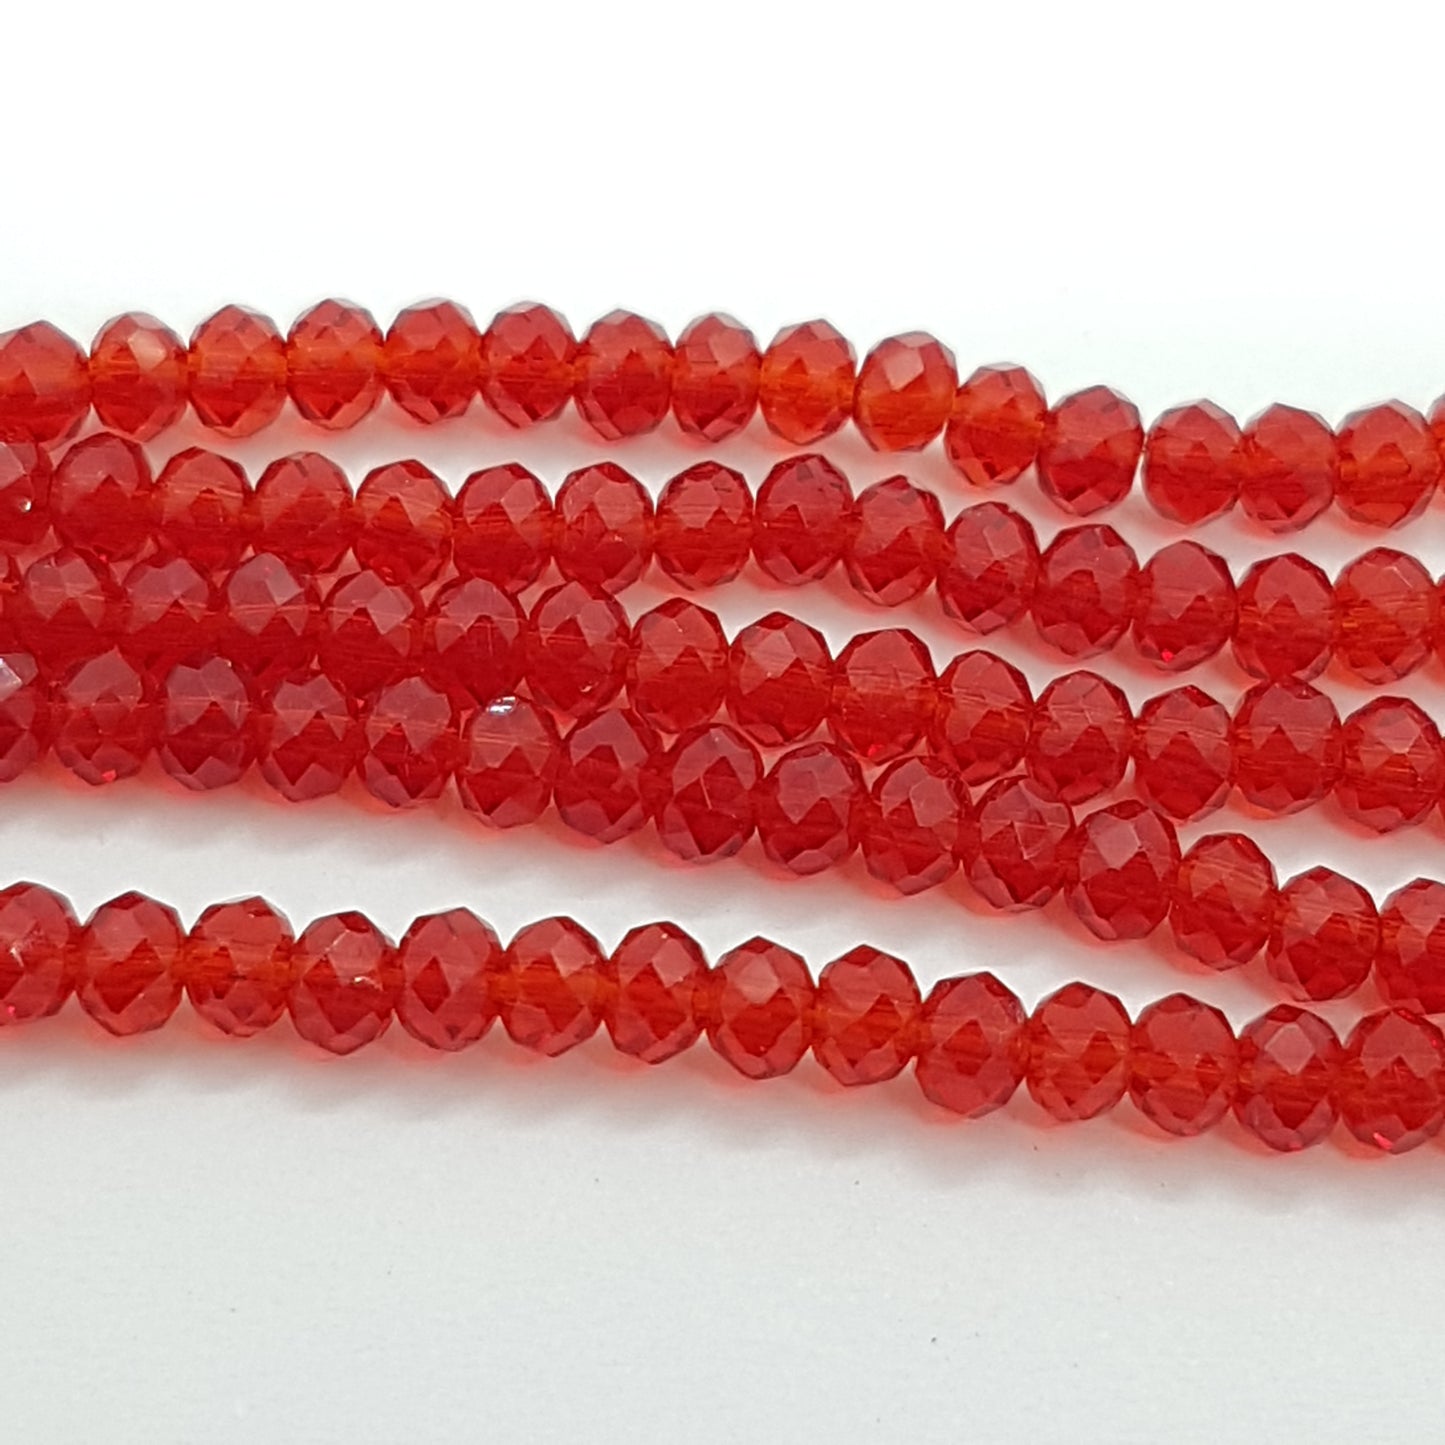 150pc Red Crystal Rondelle Beads